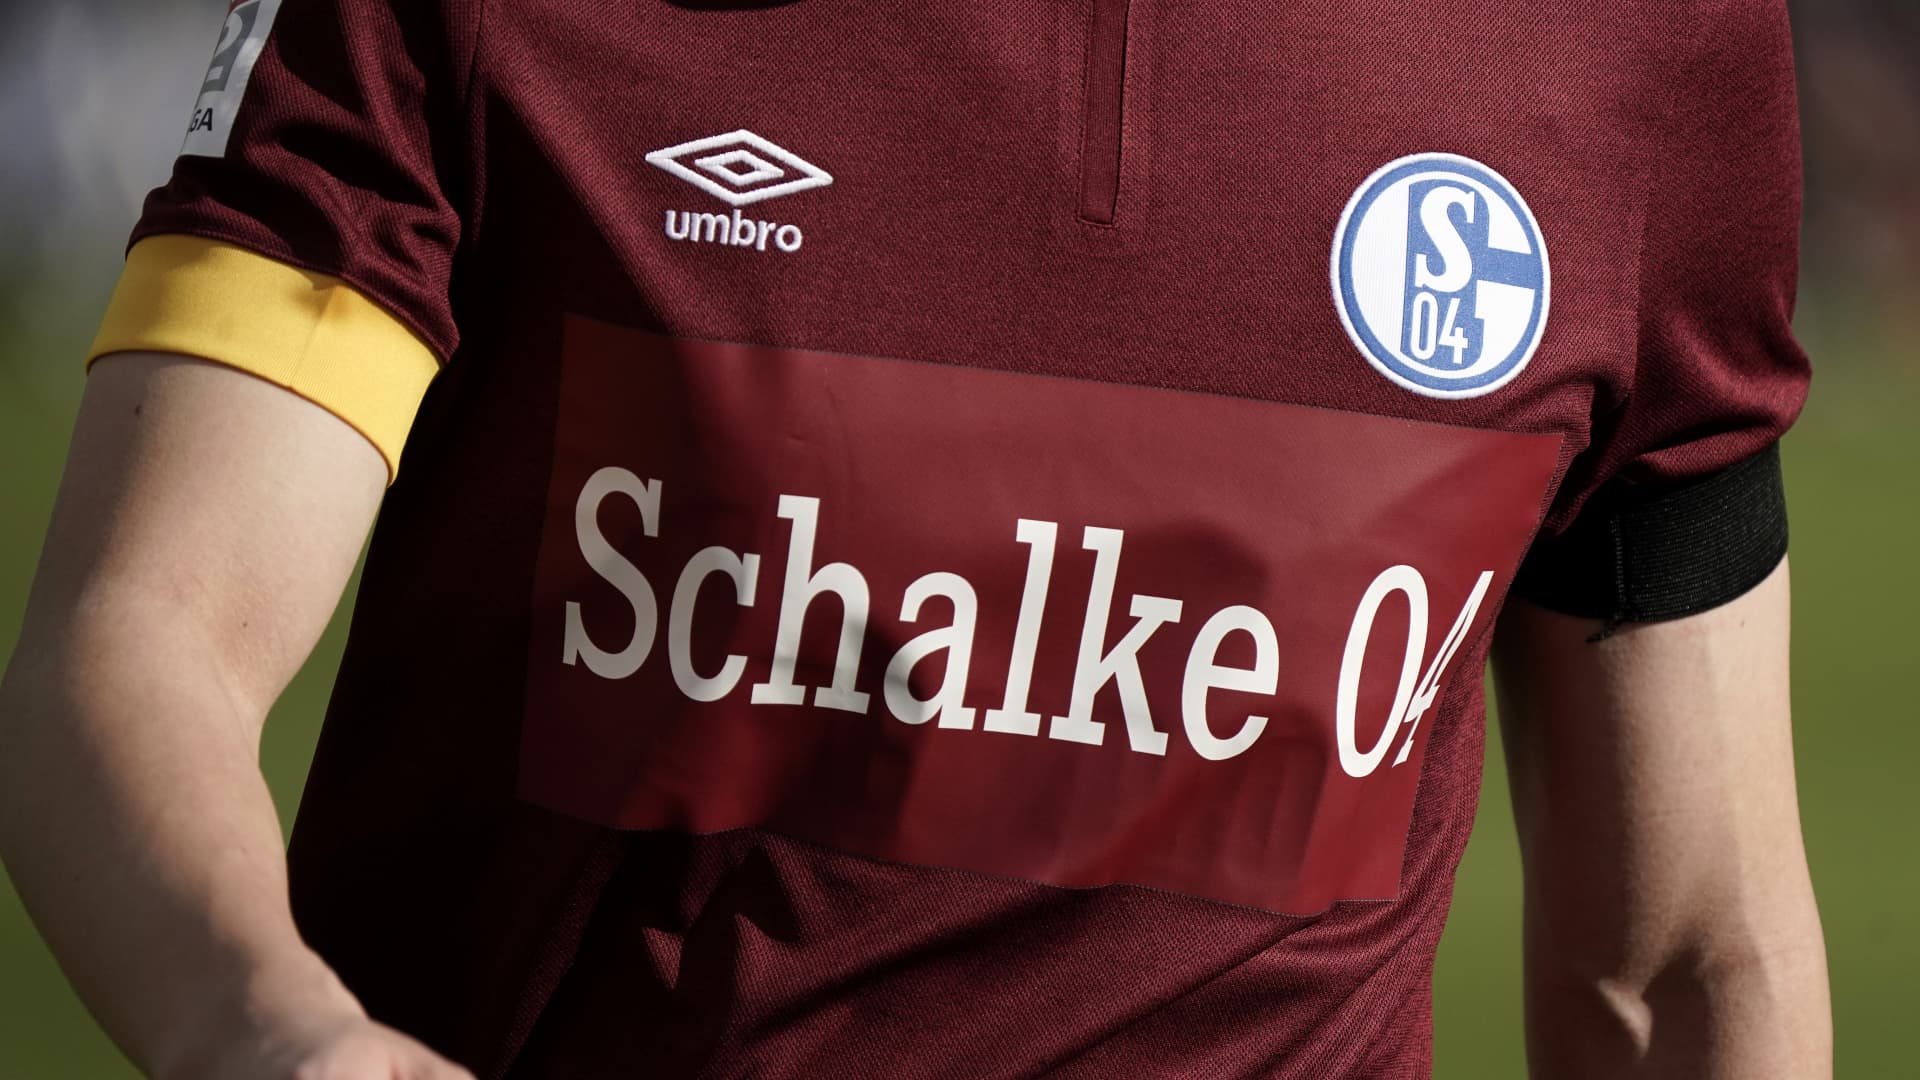 Schalke has decided to remove the logo of its main sponsor, Gazprom, from its jerseys. Instead the lettering 'Schalke 04' will appear on the players' chests.